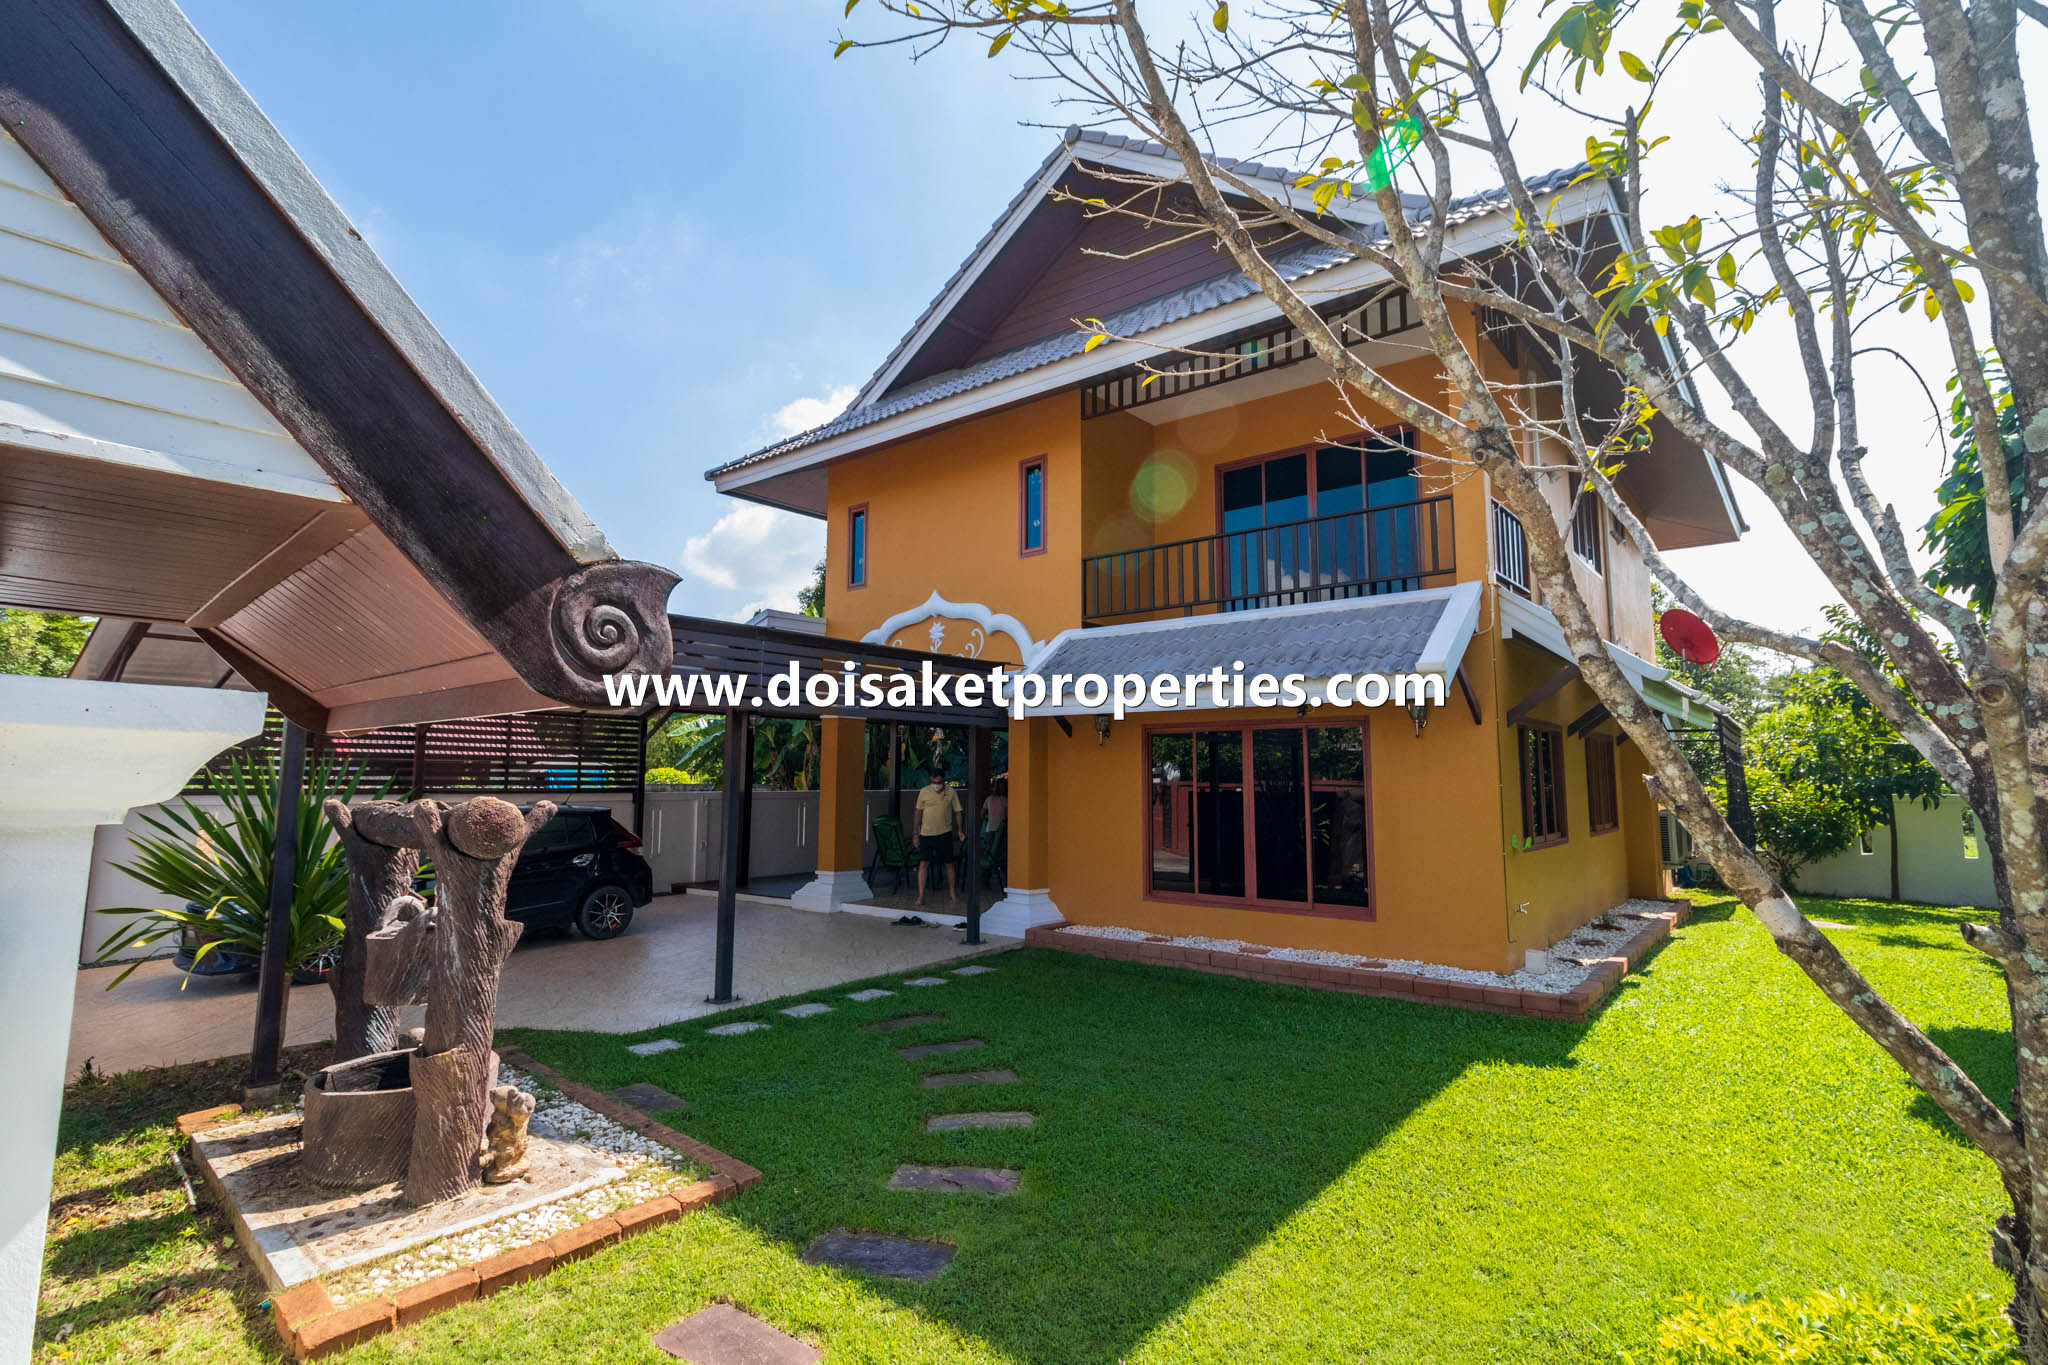 Doi Saket-DSP-(HS327-02) Lovely 2-Bedroom Home with Pretty Grounds in a Great Location for Sale in Choeng Doi